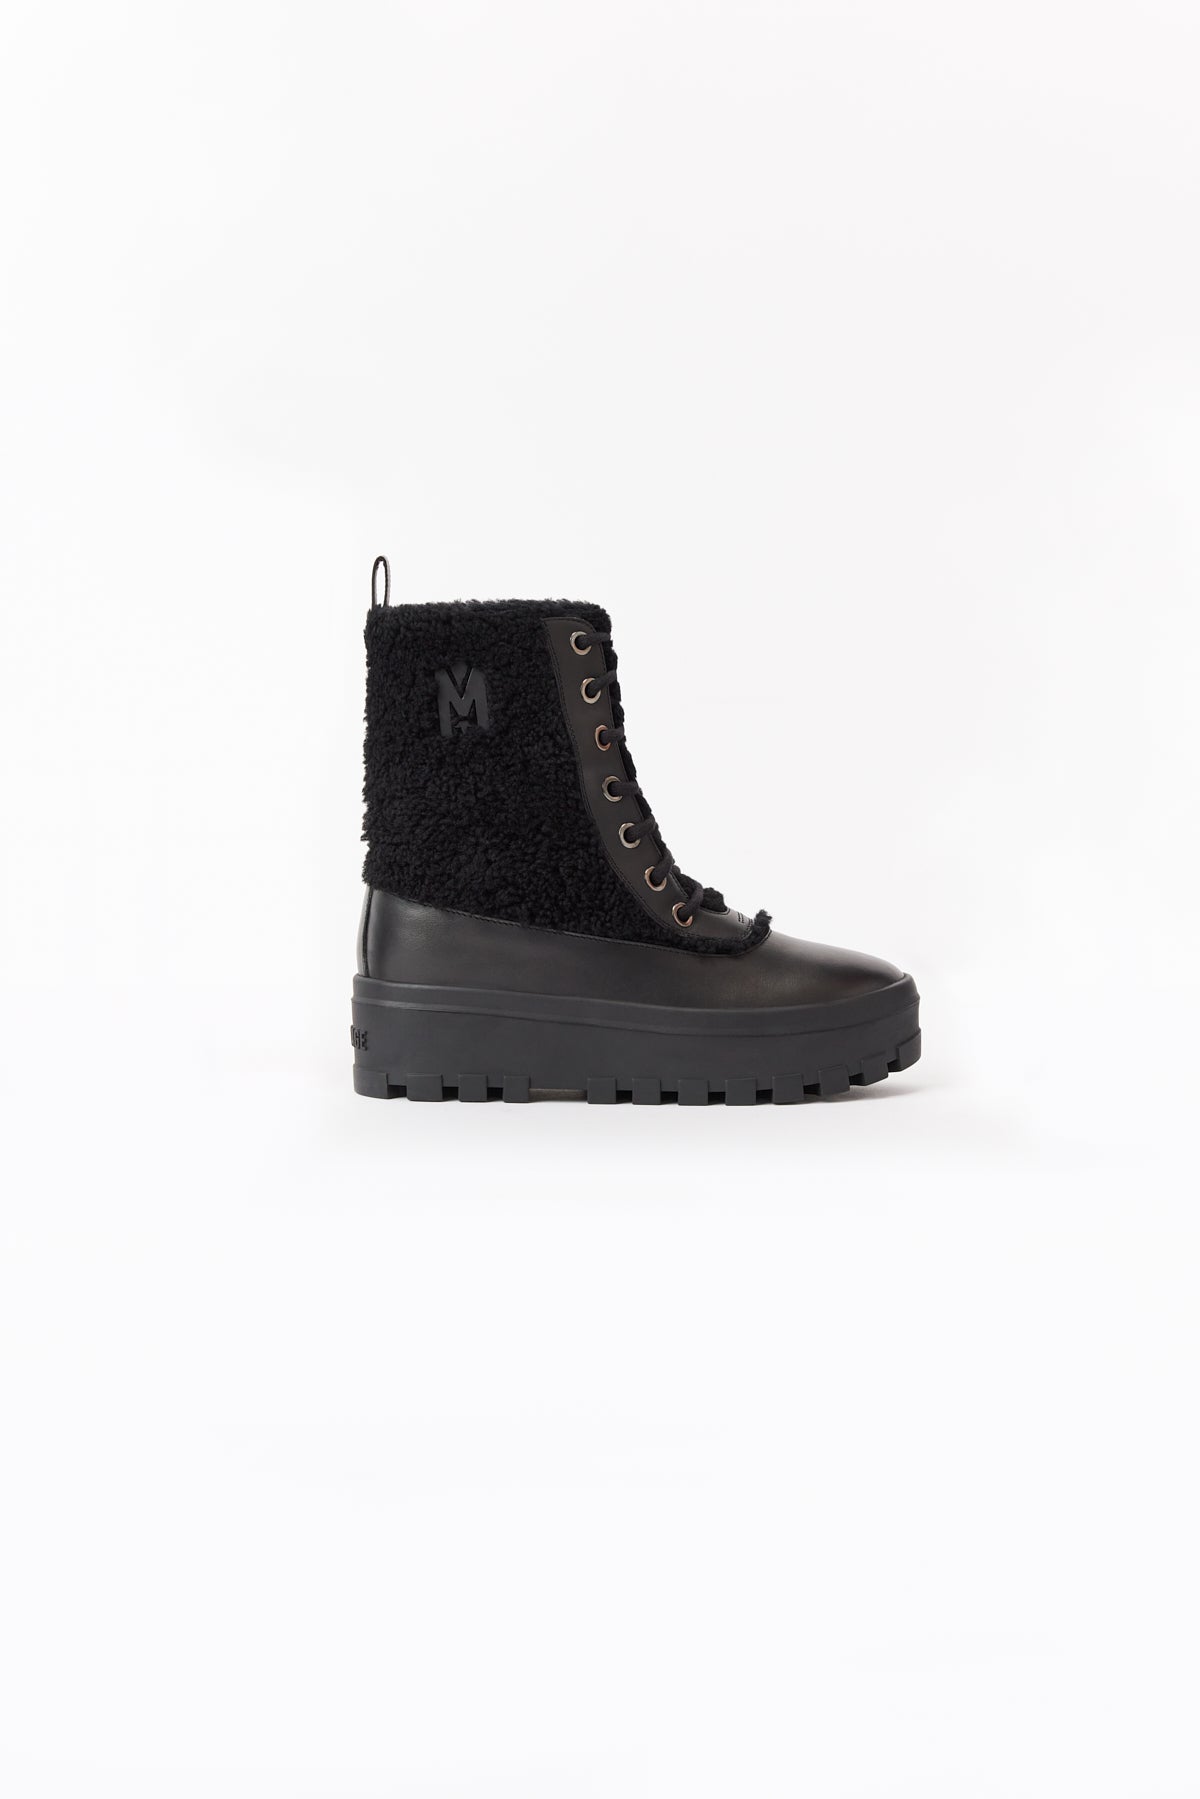 Mackage Conquer padded snow boot - Black